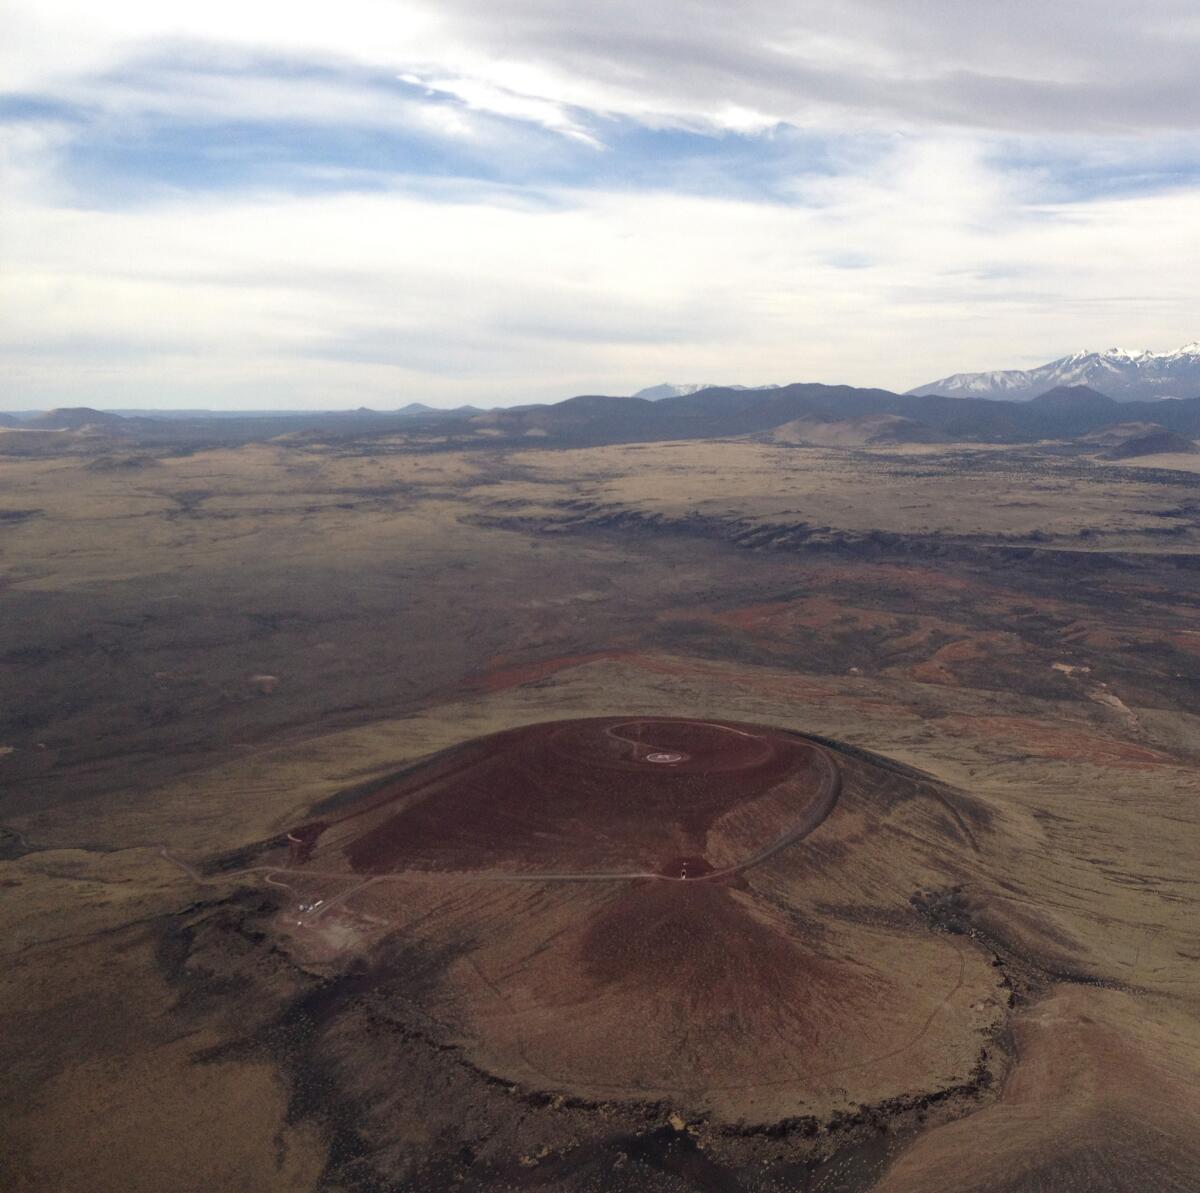 Aerial view of the Roden Crater, the extinct Arizona volcano that James Turrell has spent decades transforming into a work of art.